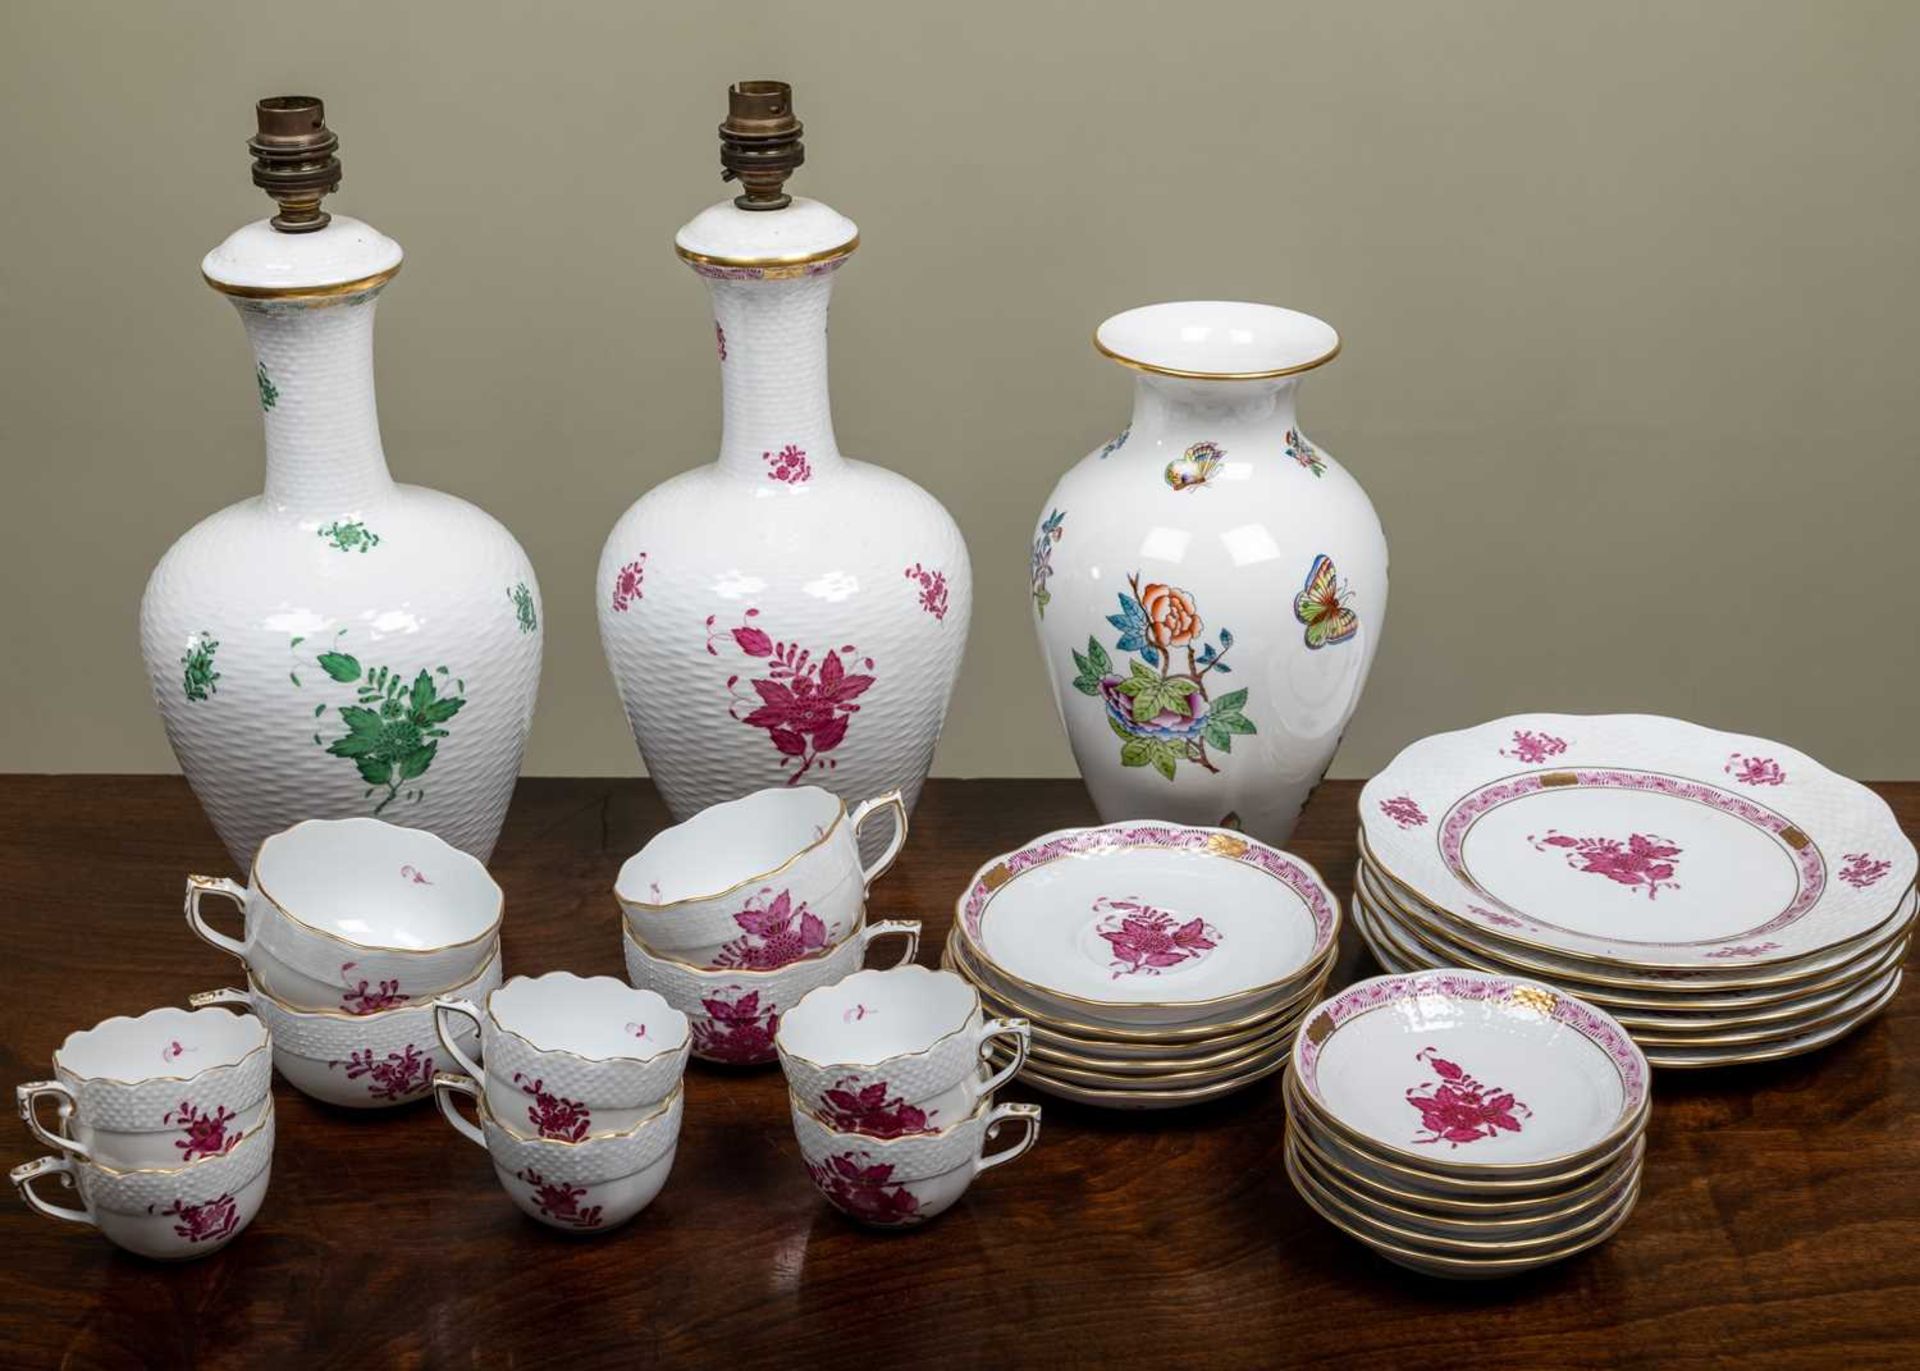 A group of Herend porcelain consisting of six espresso cups and saucers, four teacups and six